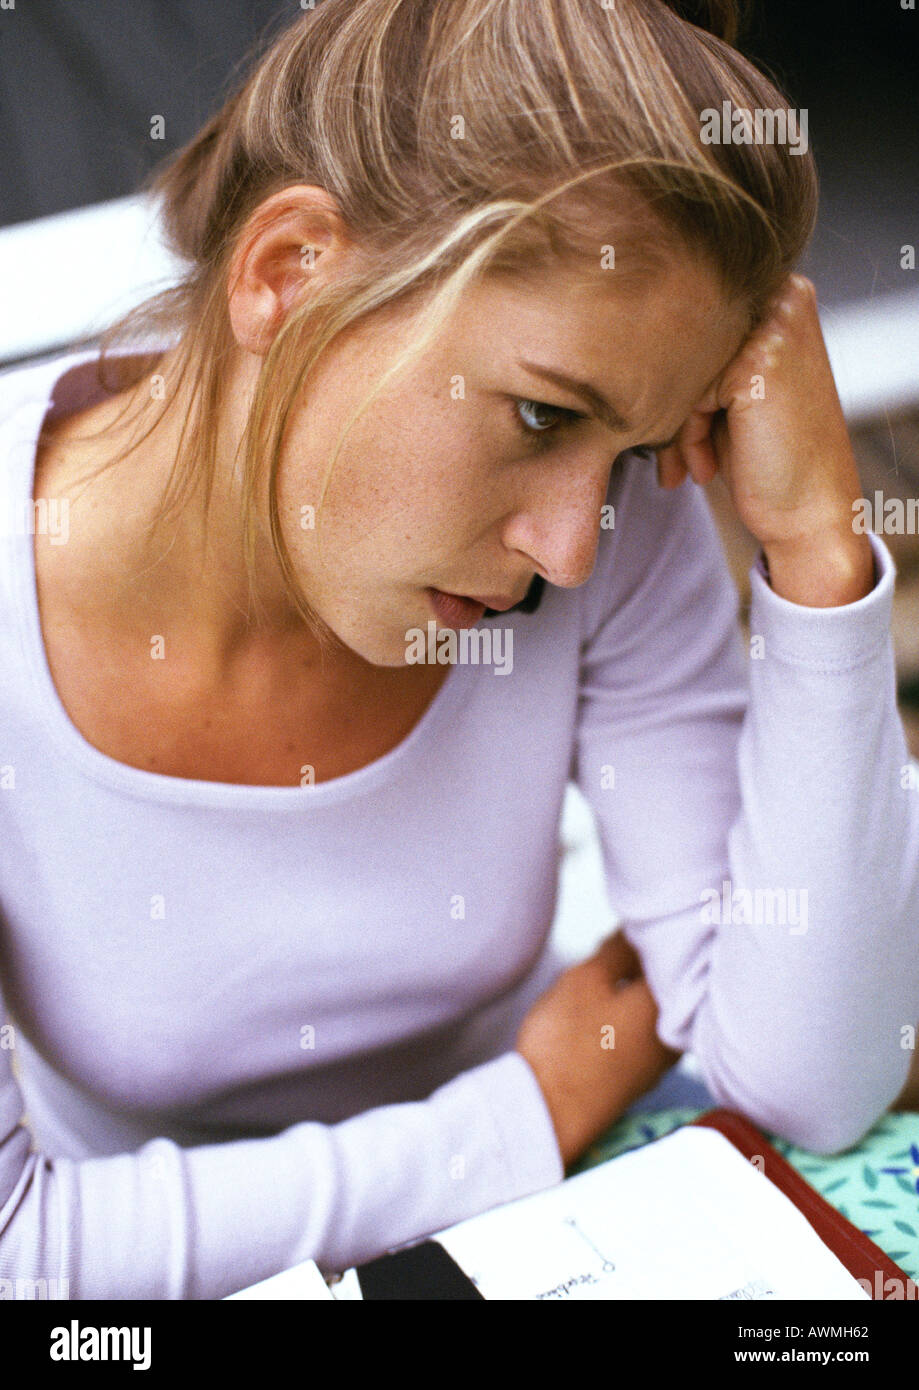 Woman sitting, head against hand, close-up, high angle view Stock Photo